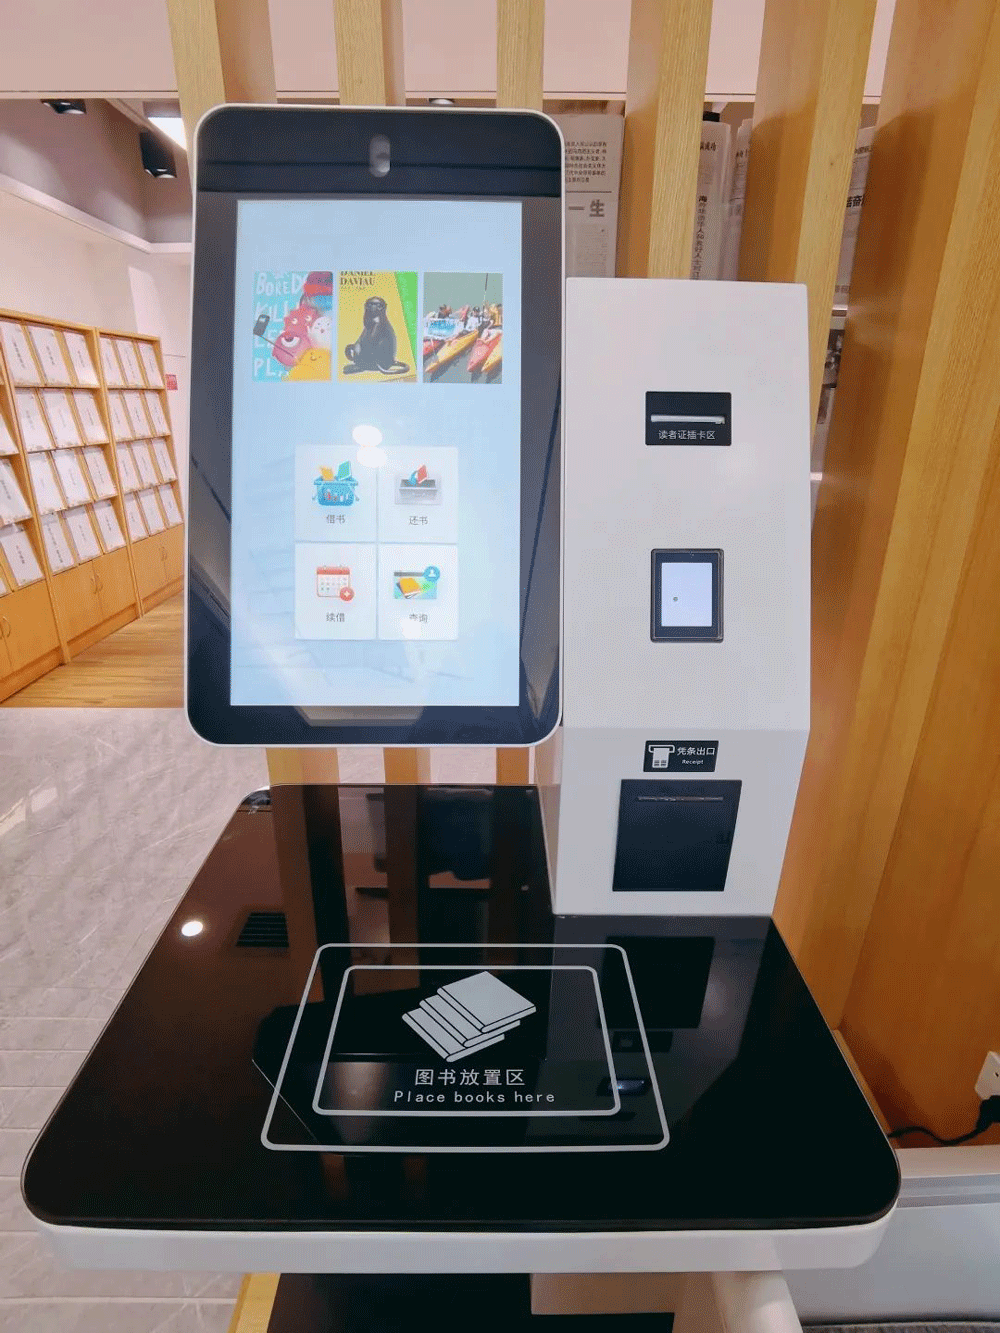 The application of touch inquiry machine in library